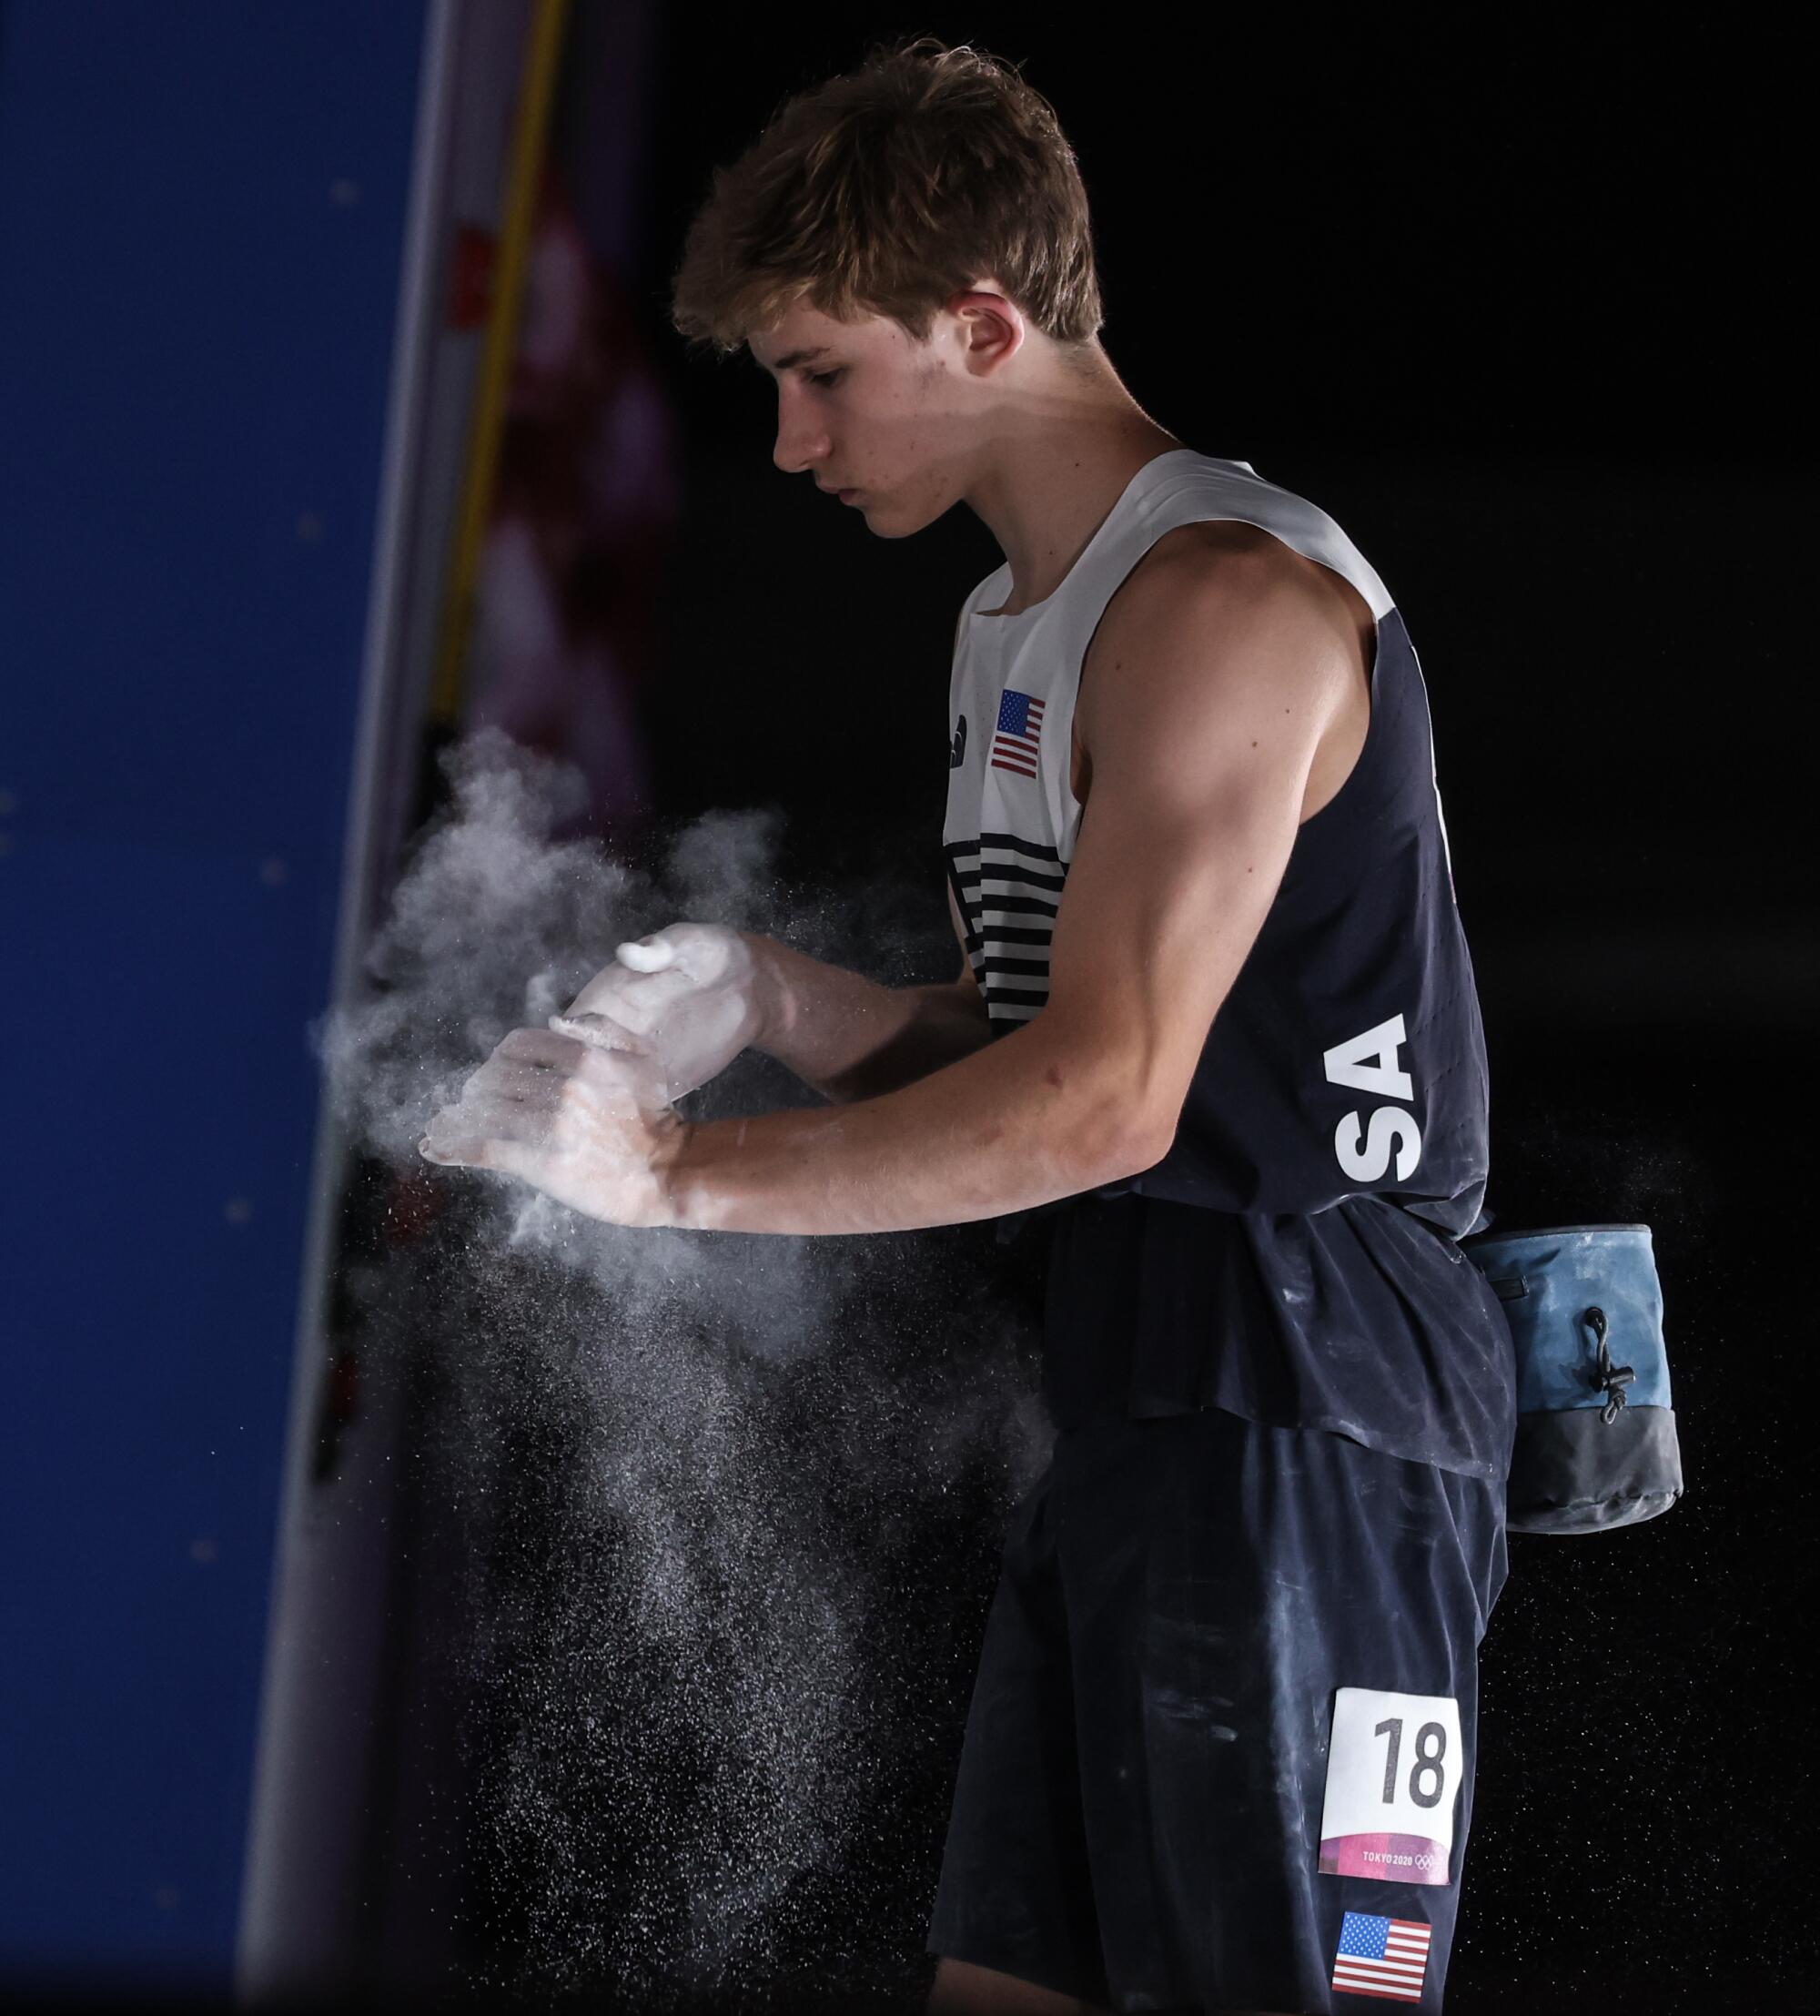 USA climber Danny Duffy prepares to compete in the Men's Combined Bouldering Final.